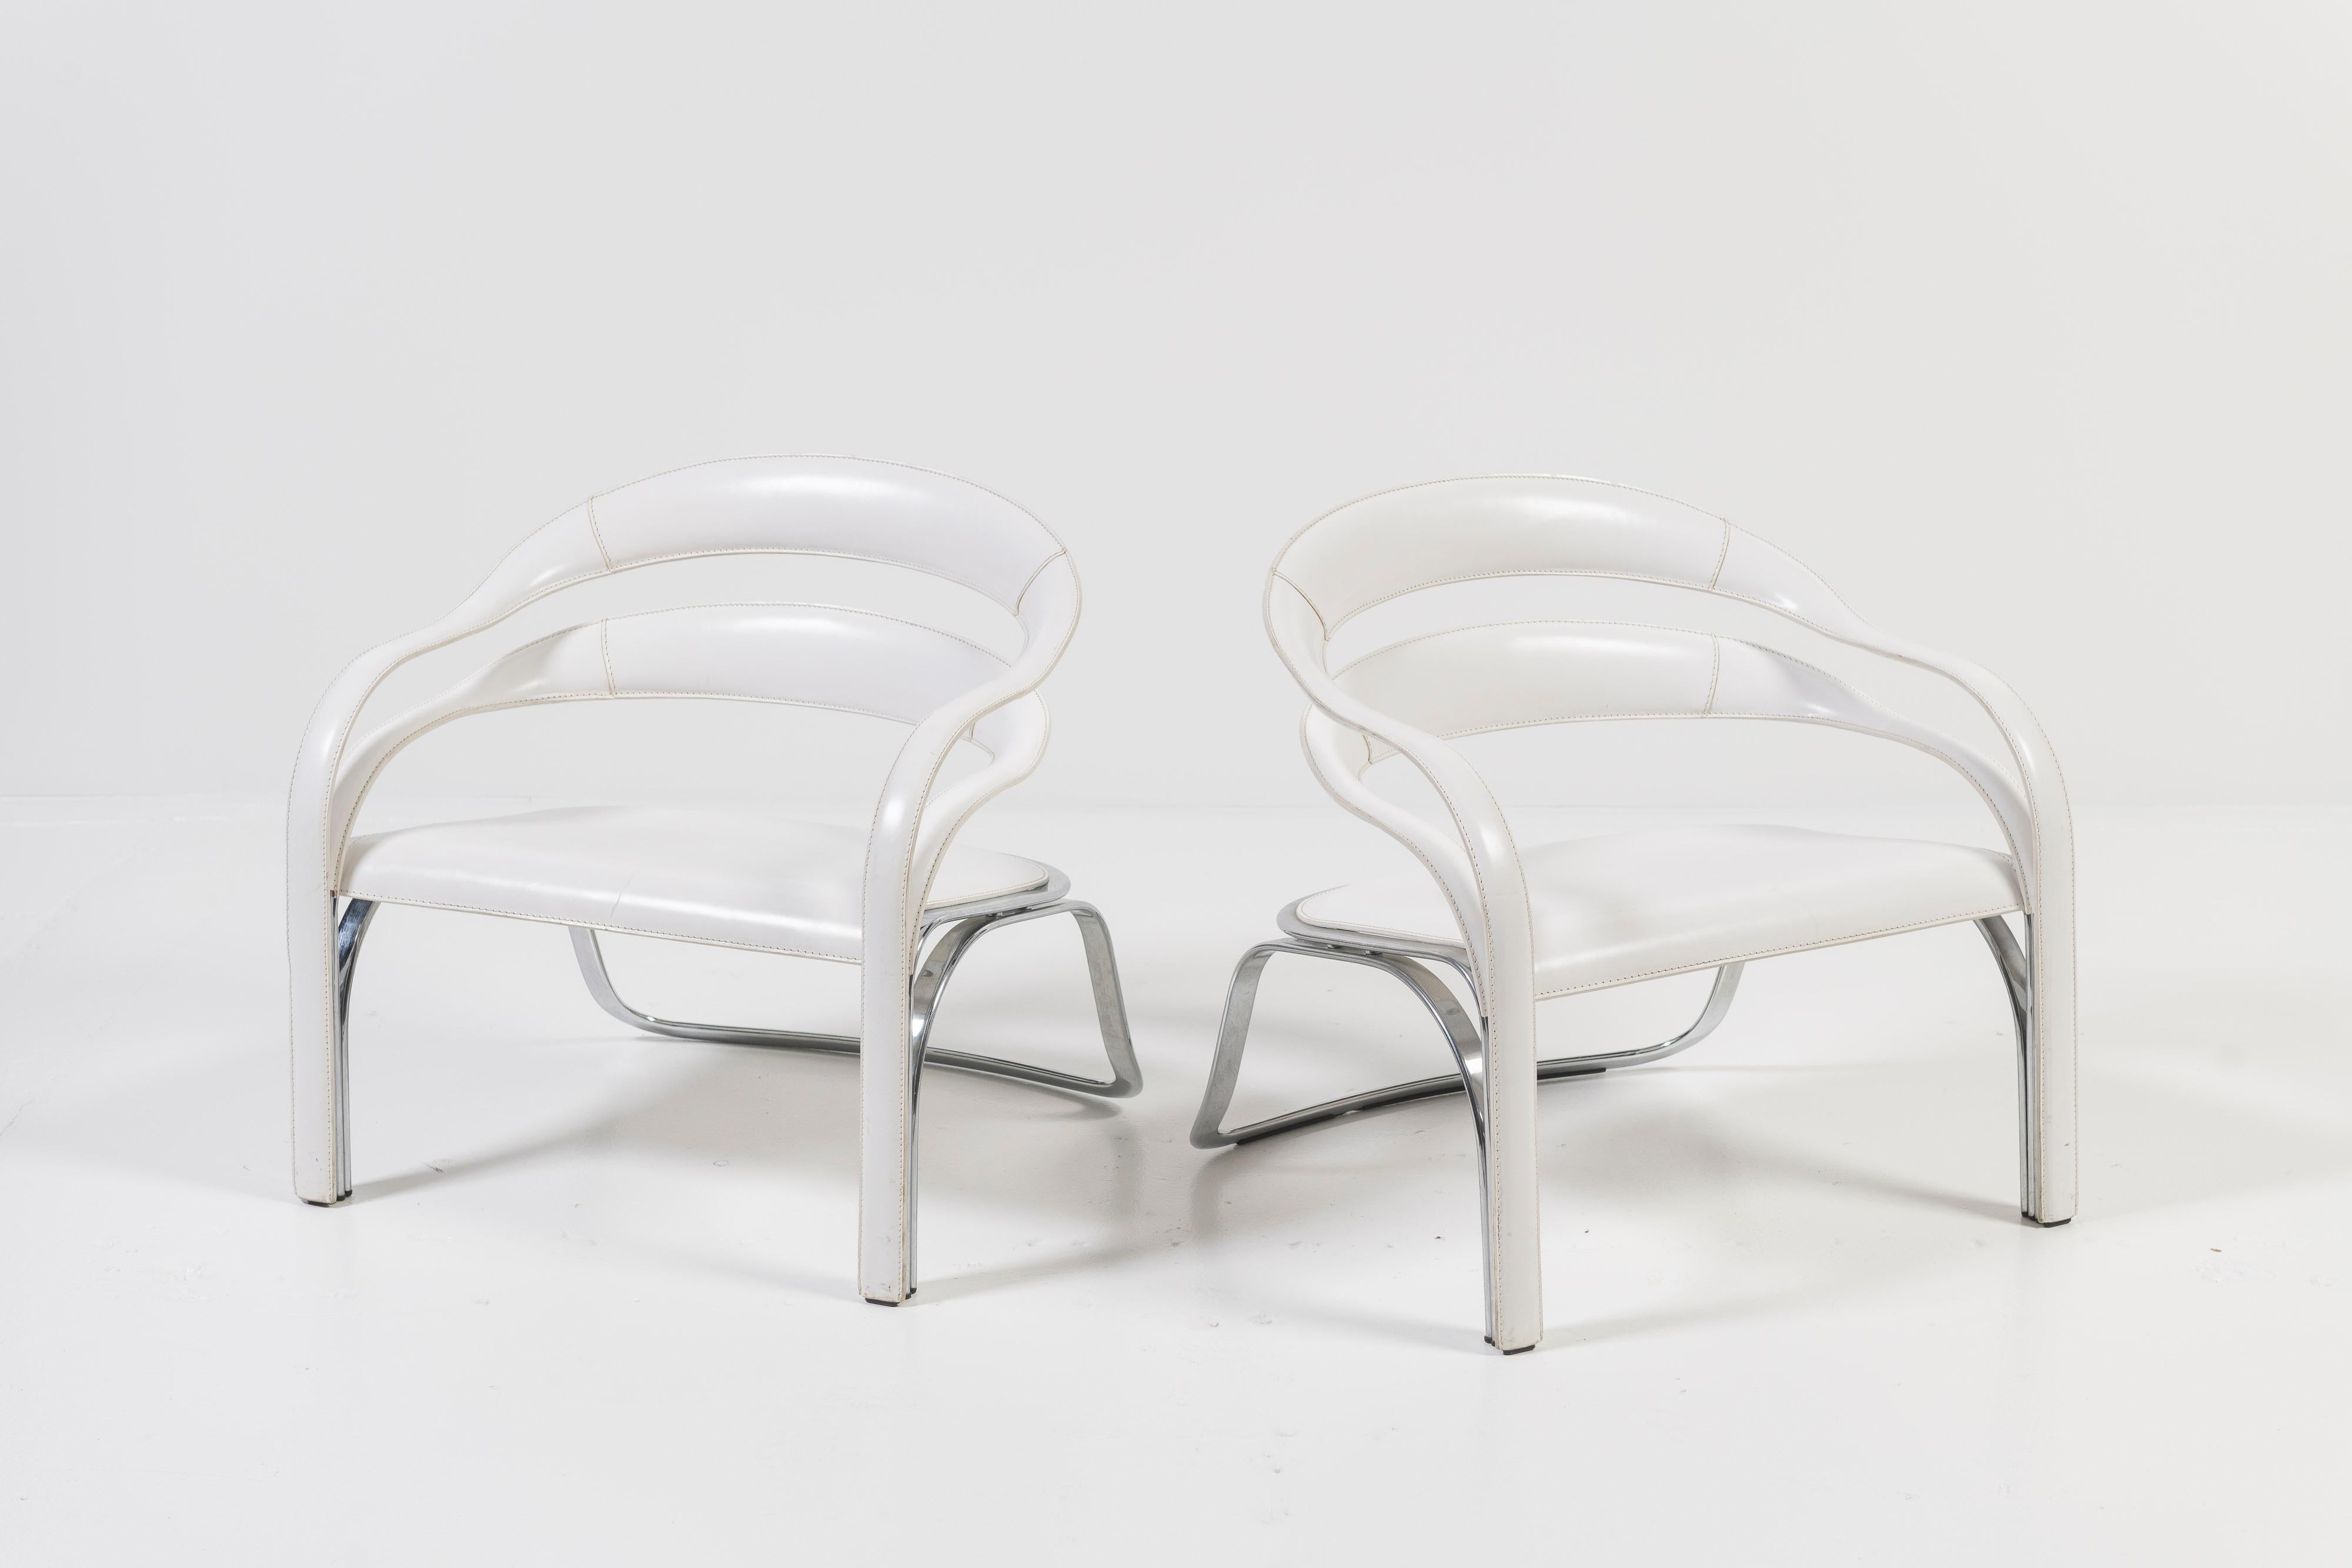 The Fettuccini W Lounge Chair by Fasem is a sexy, comfortable lounge armchair with a flexible steel frame. World renowned, Vladimir Kagan created signature designs that feature sleekly curved frames and dramatic silhouettes. The backrest, seat, and